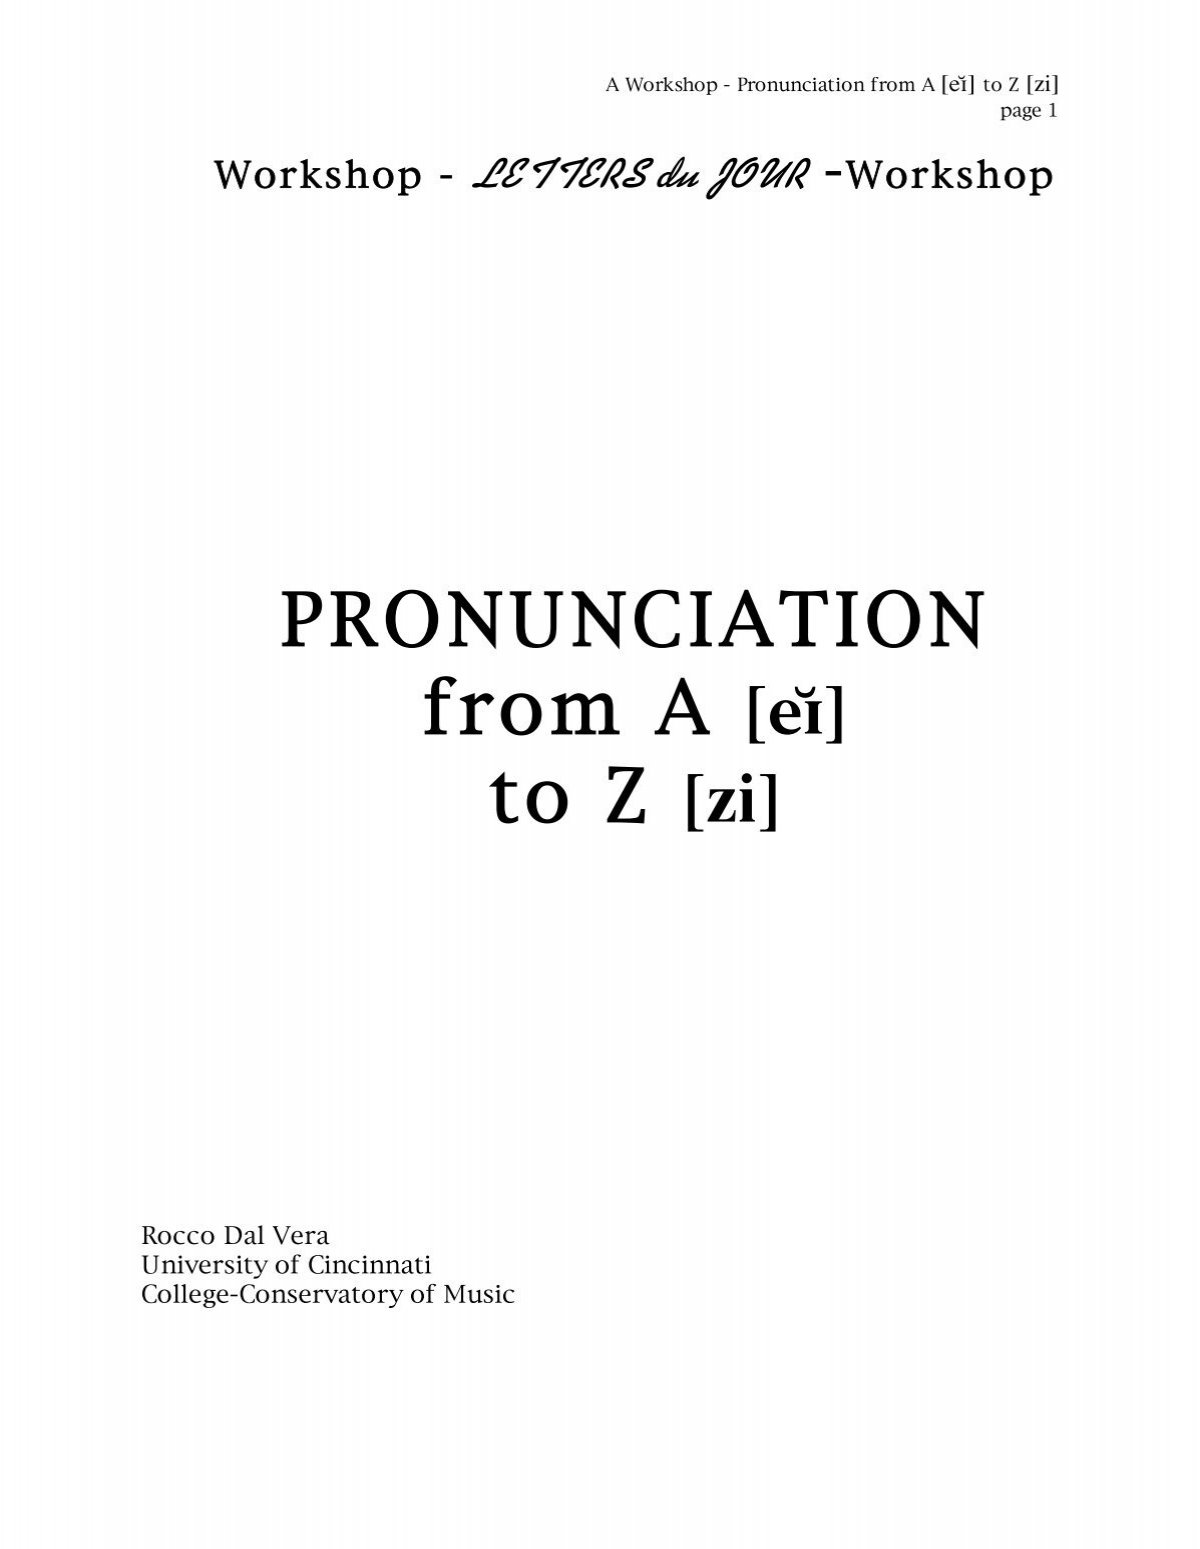 PRONUNCIATION from A Z [zi] - Routledge